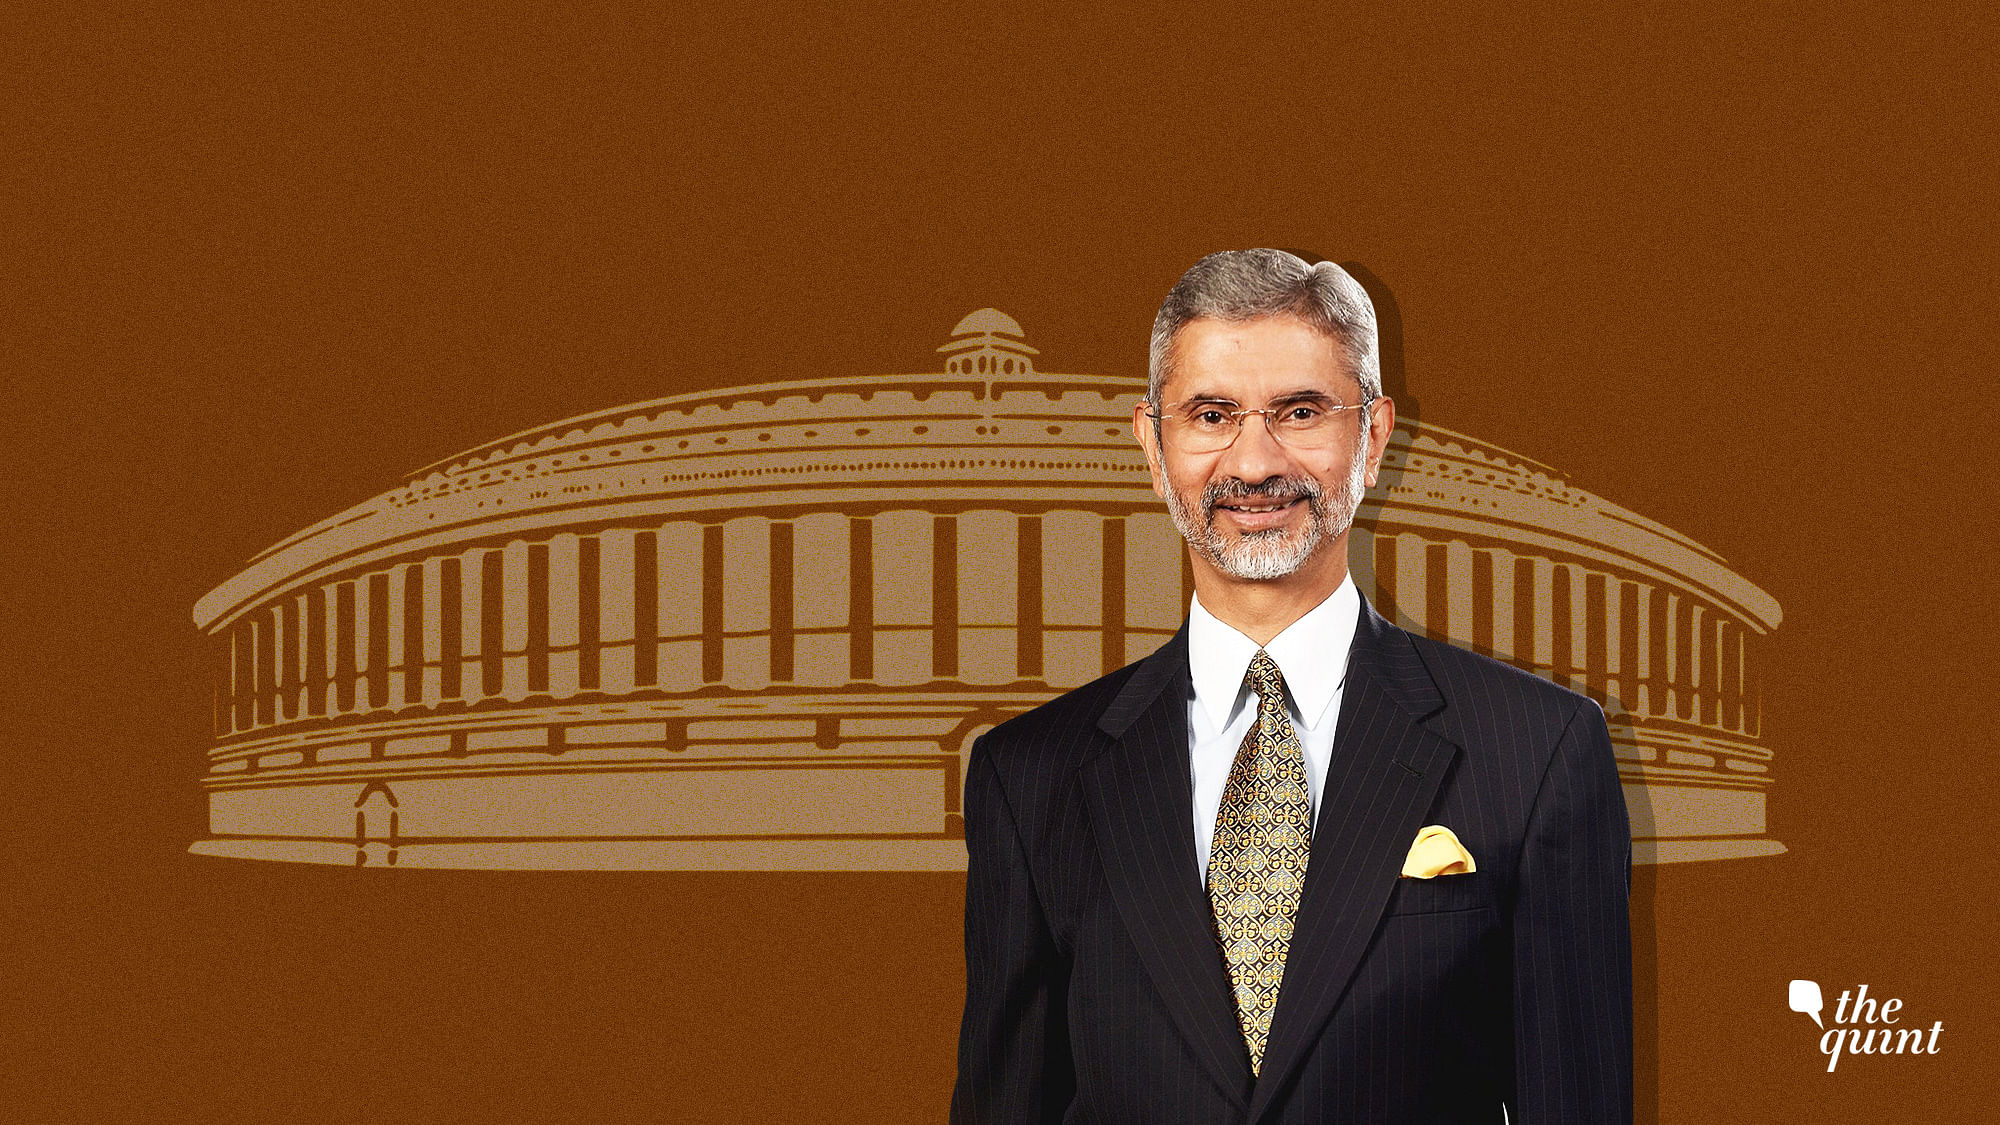 Modi’s trust in Jaishankar, a career diplomat, to help navigate the choppy waters of today’s rapidly changing world is well placed.